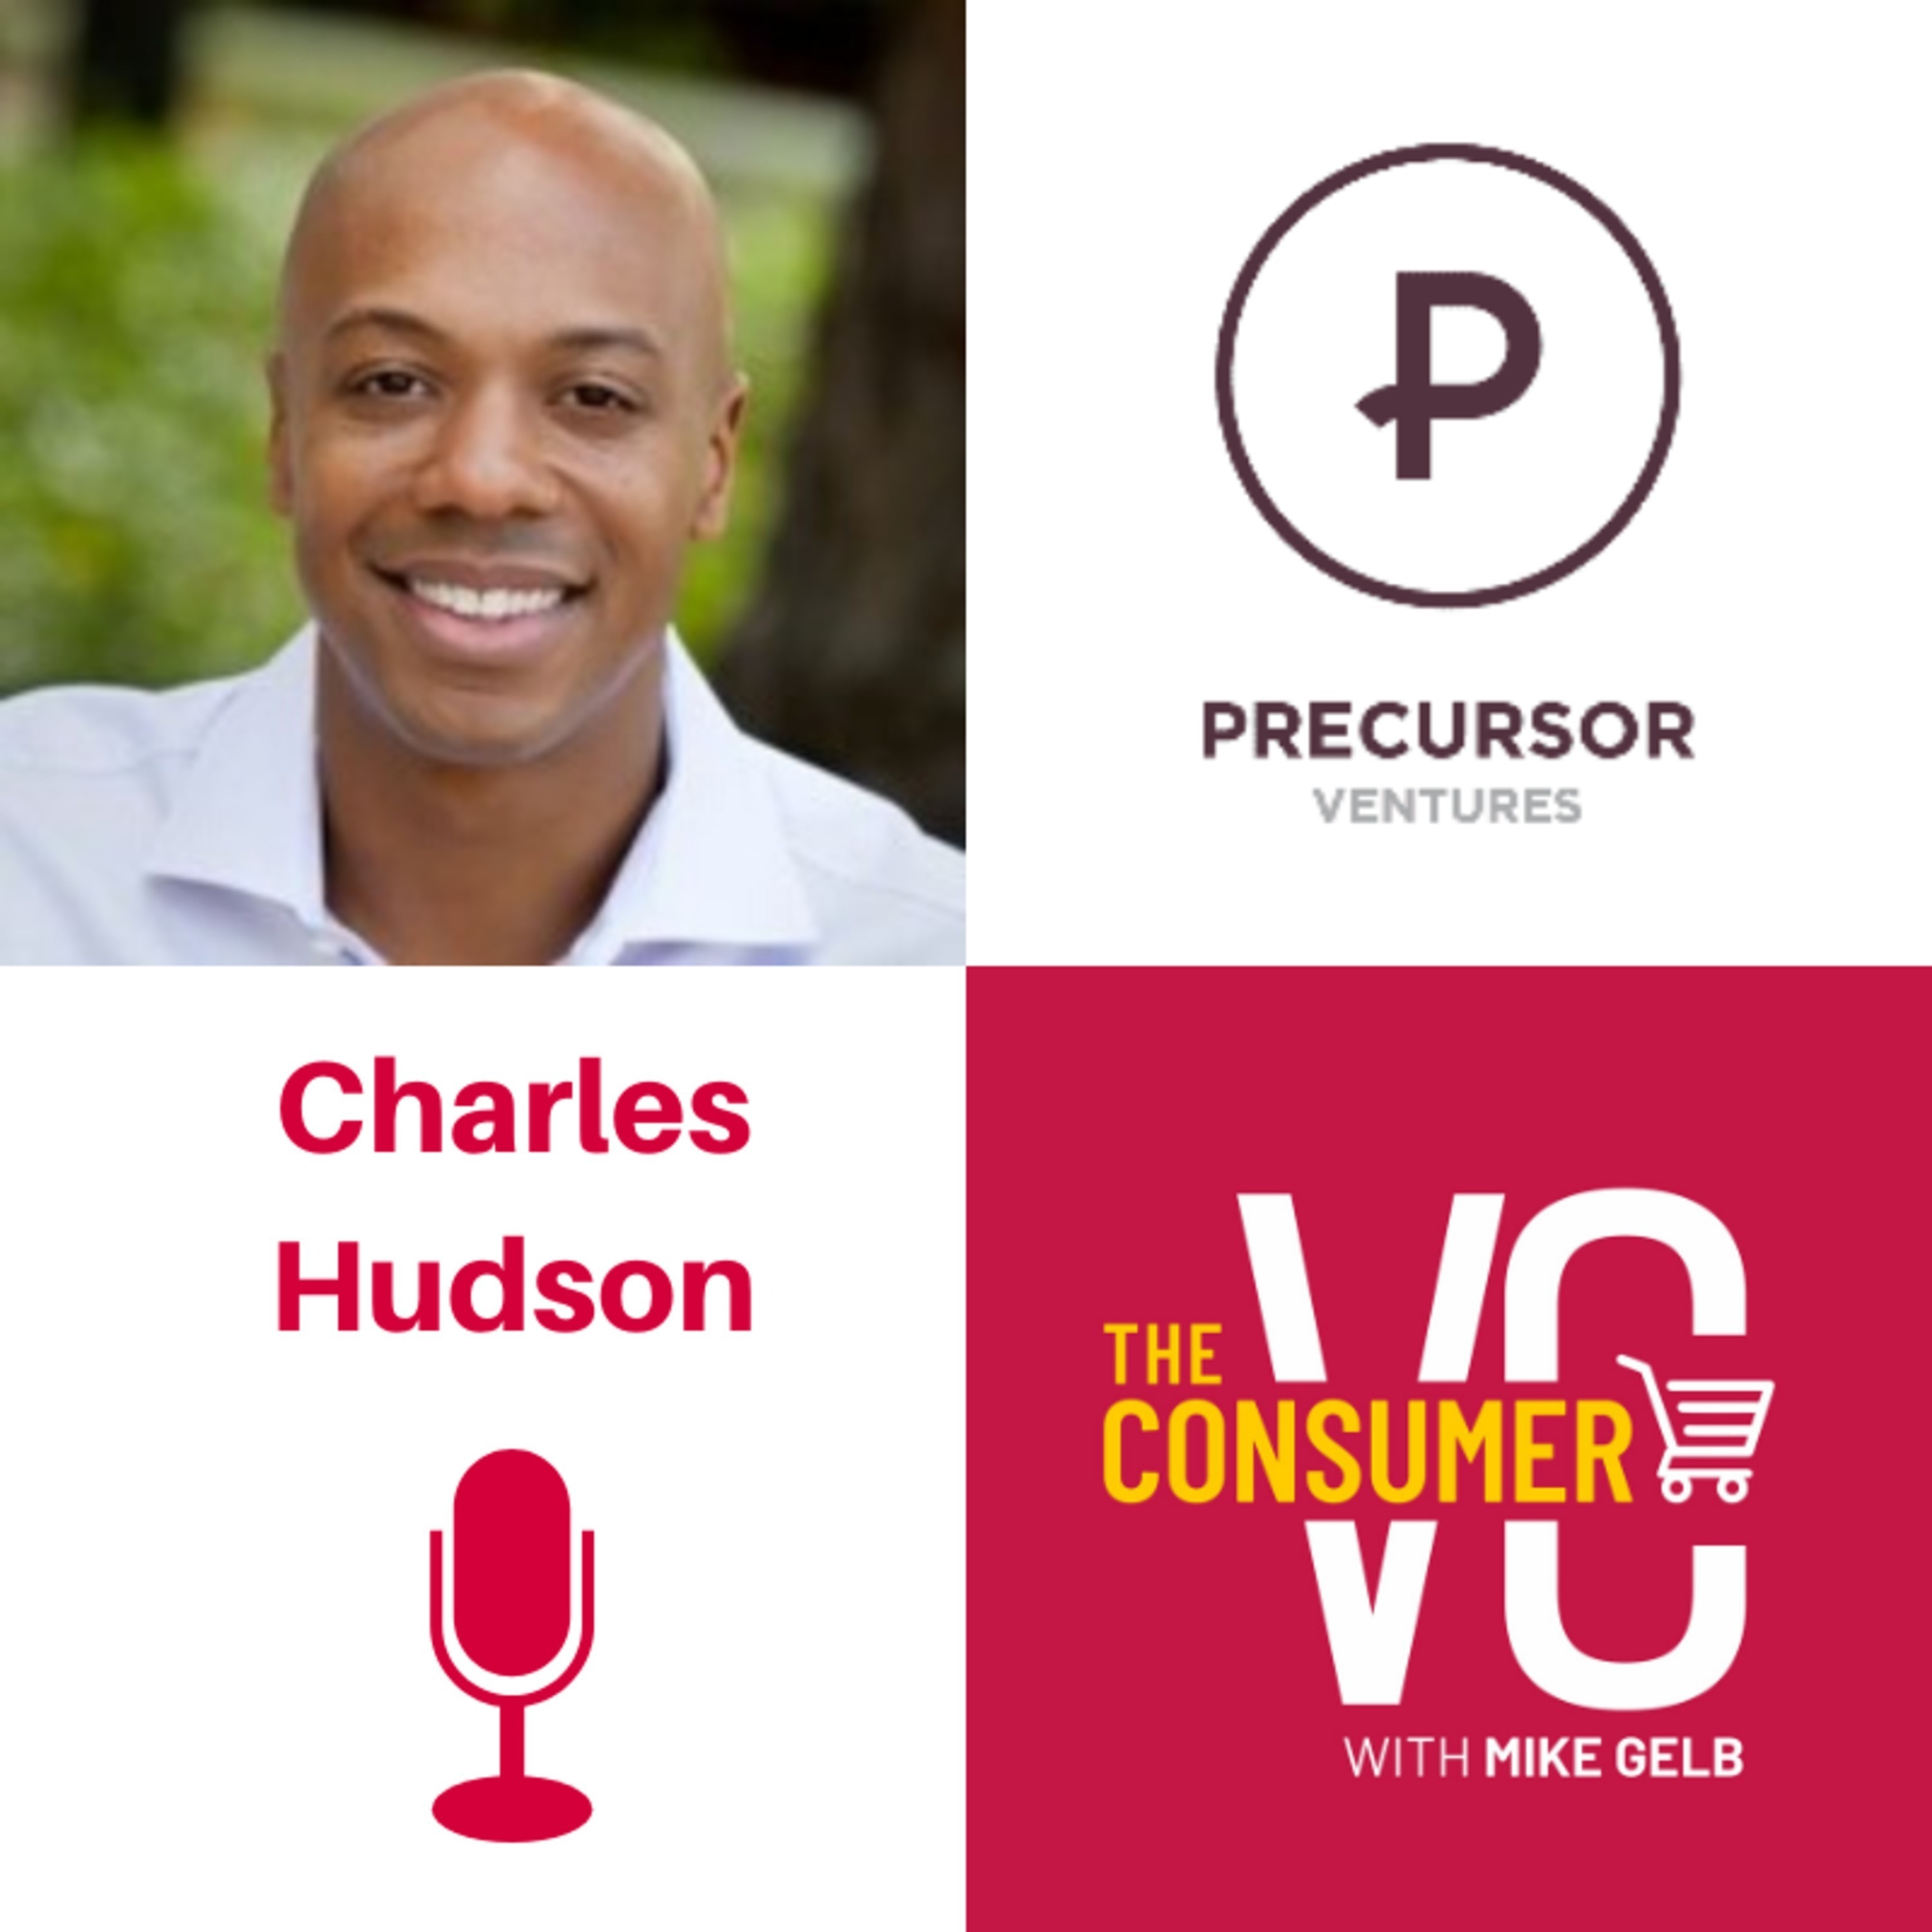 Charles Hudson (Precursor Ventures) - The State of Seed Investing, The Early Stage Ecosystem, and Why Consumer Has Been Out Of Favor with VCs